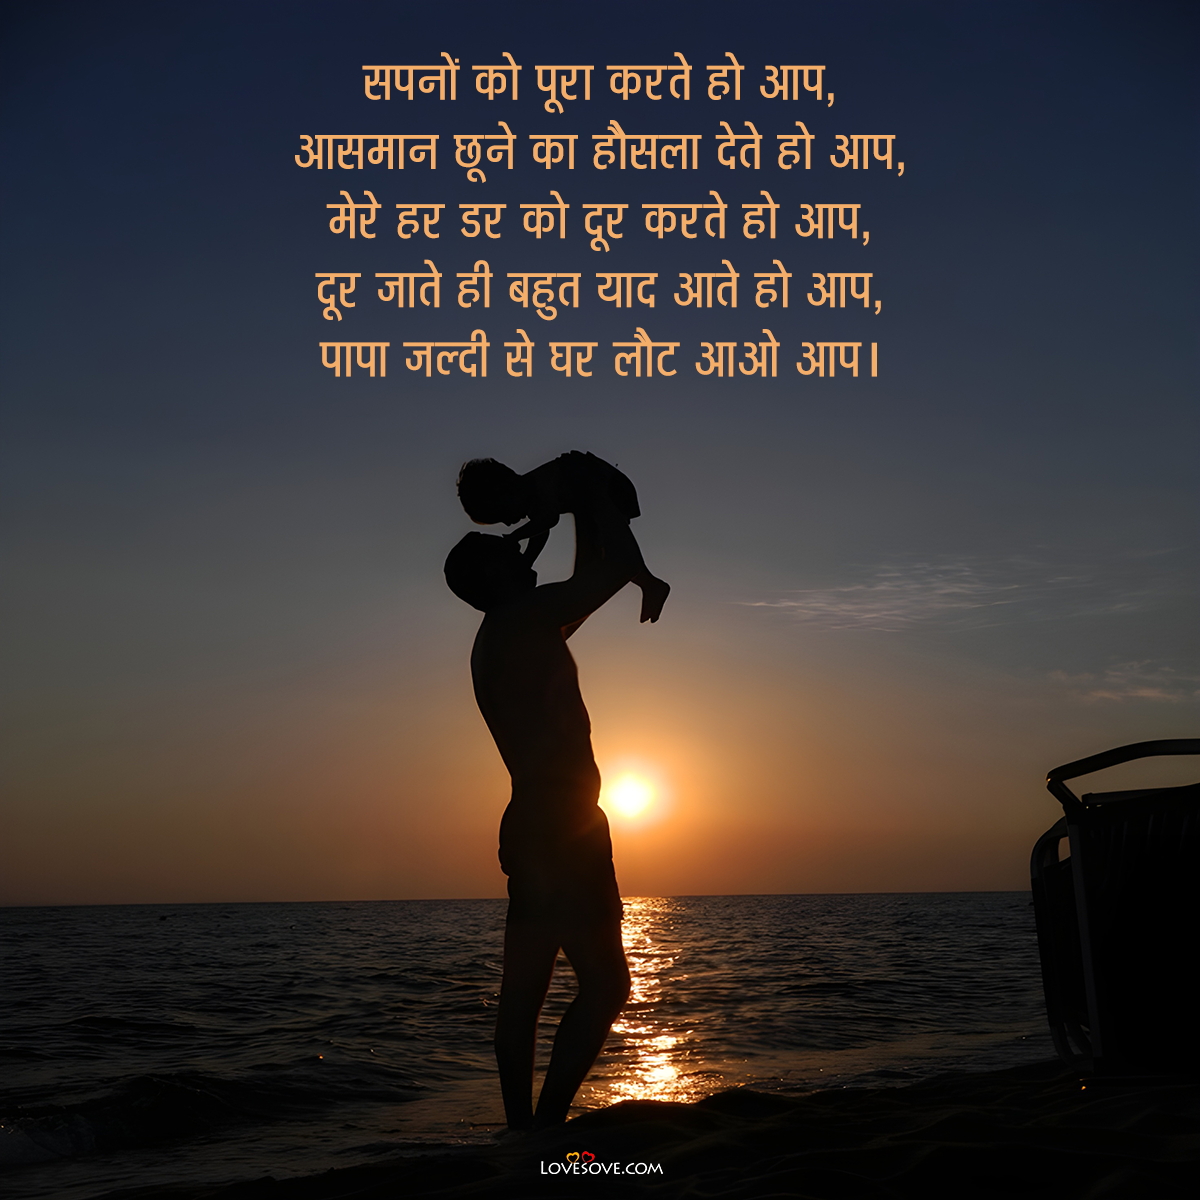 miss you quotes for siblings in hindi, मां के लिए आई मिस यू शायरी